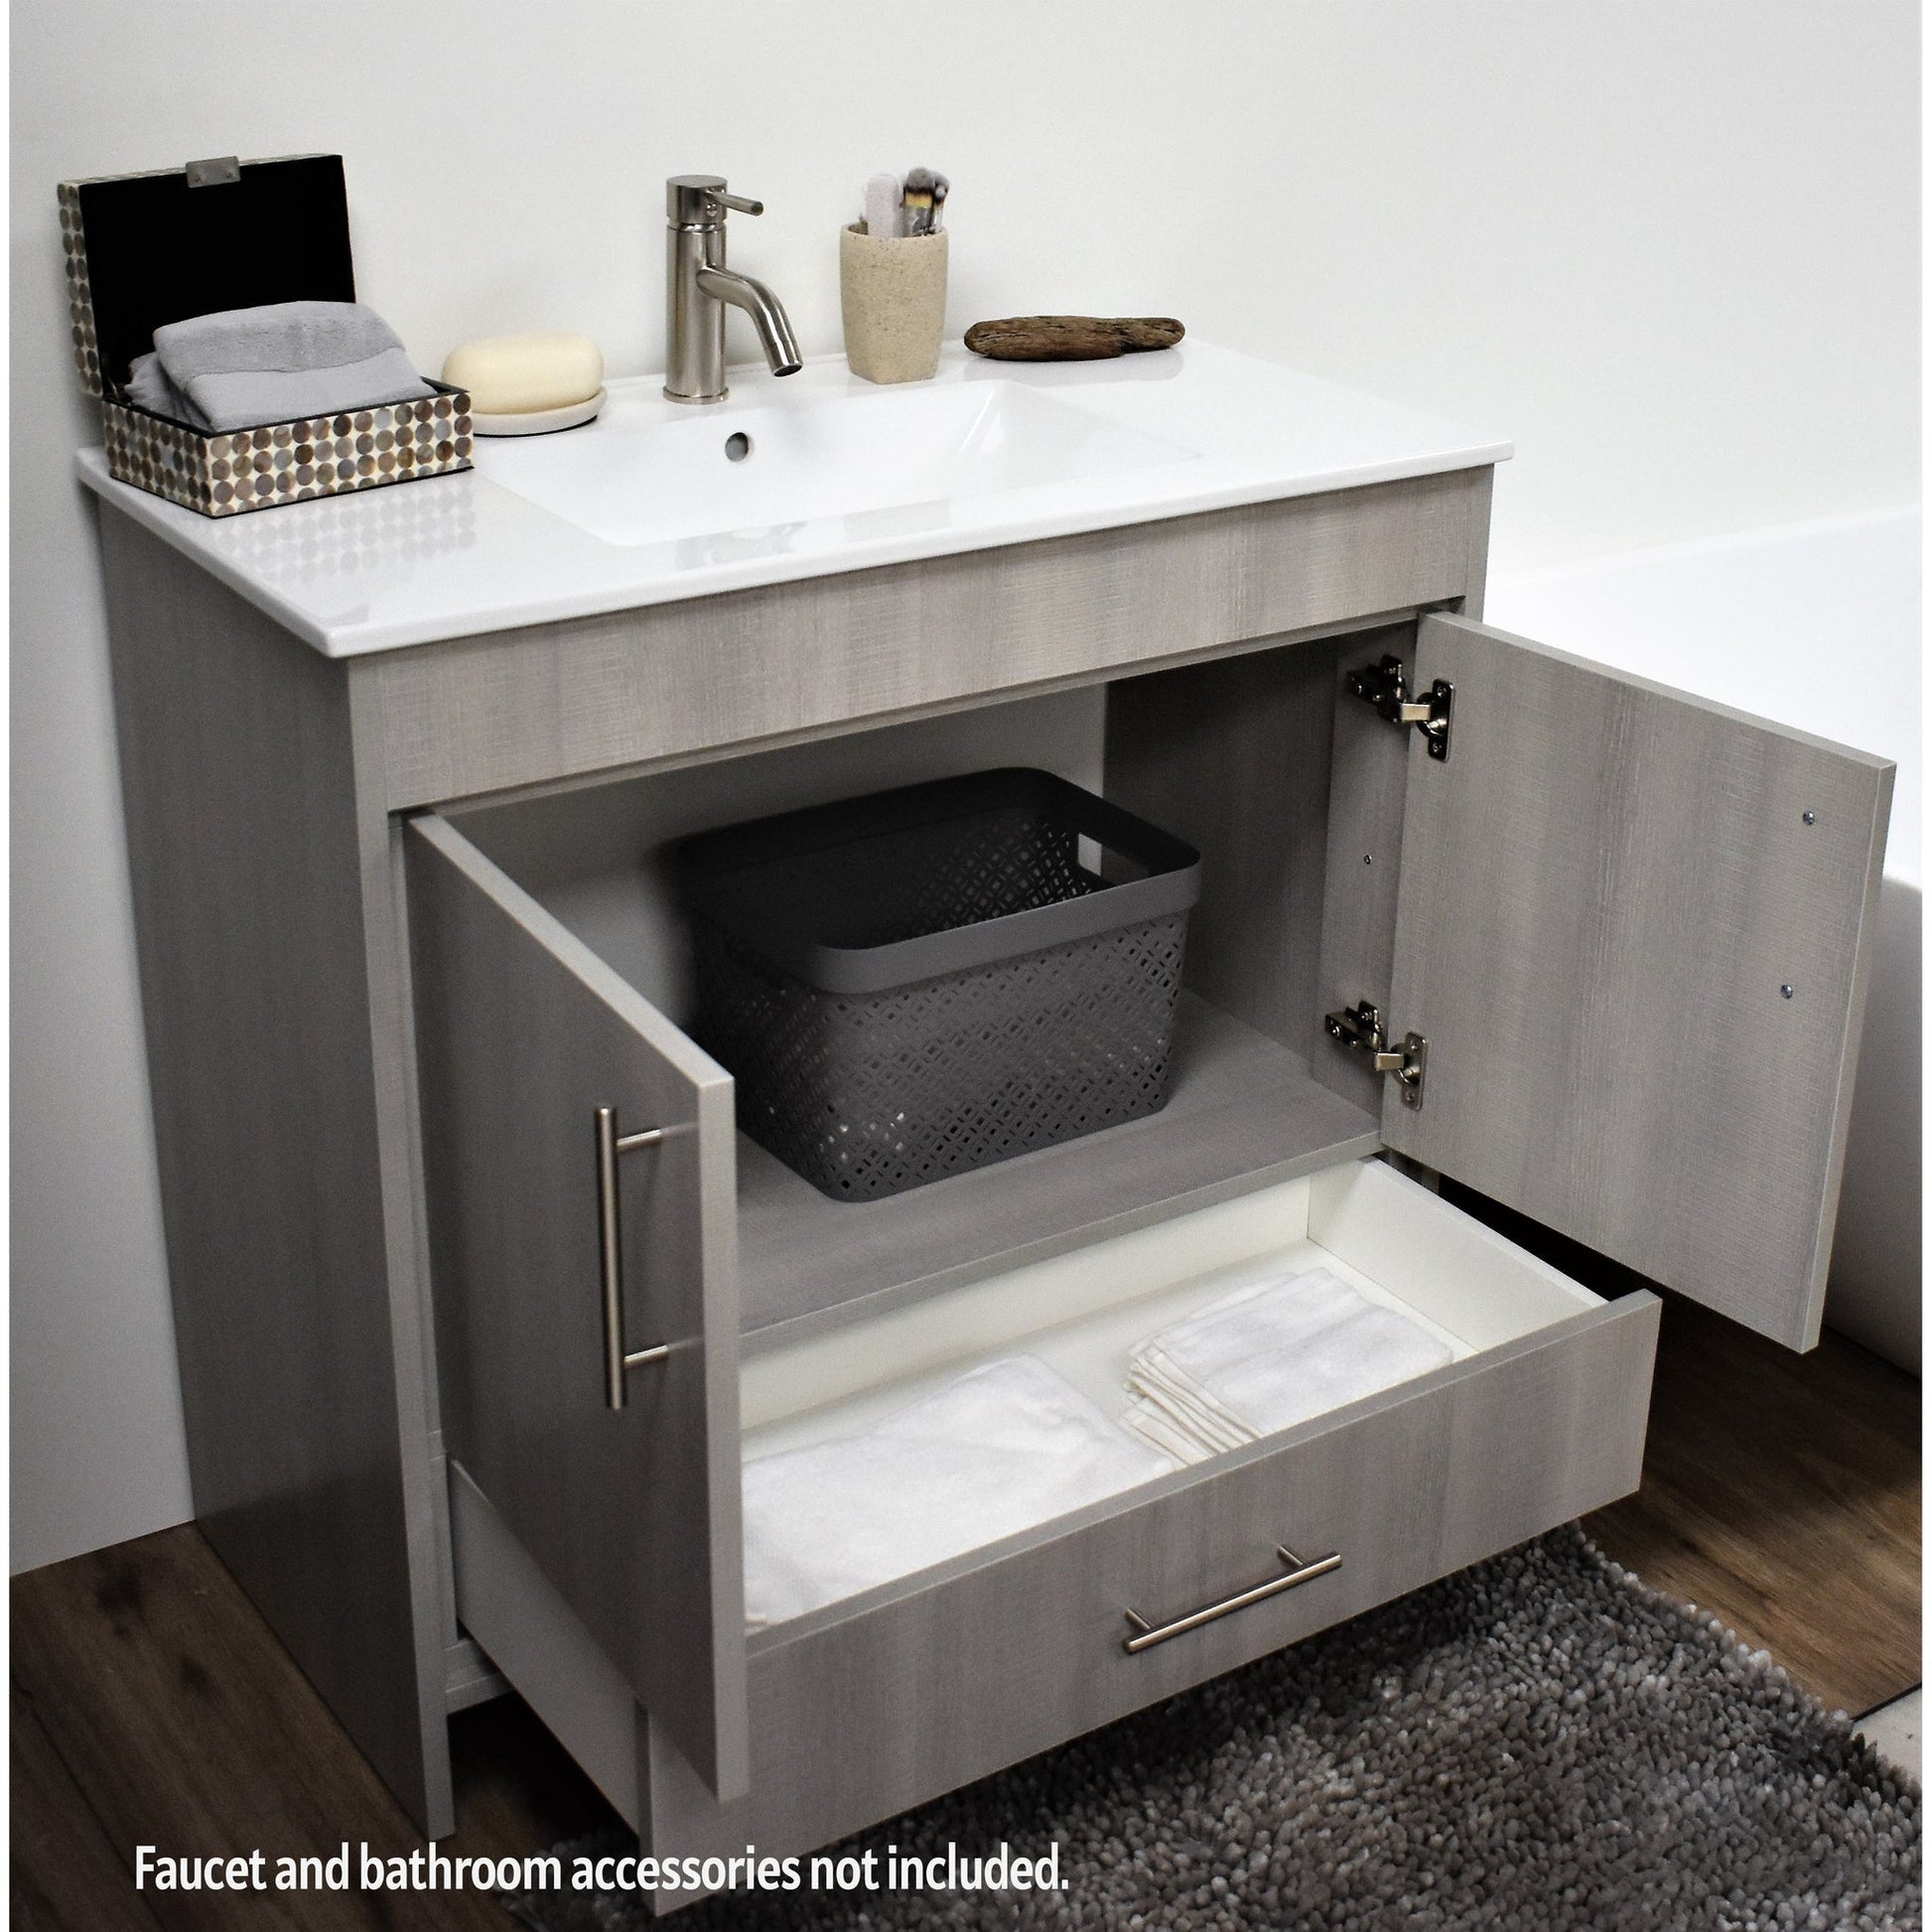 Volpa USA Pacific 36" Weathered Gray Freestanding Modern Bathroom Vanity With Integrated Ceramic Top and Brushed Nickel Round Handles